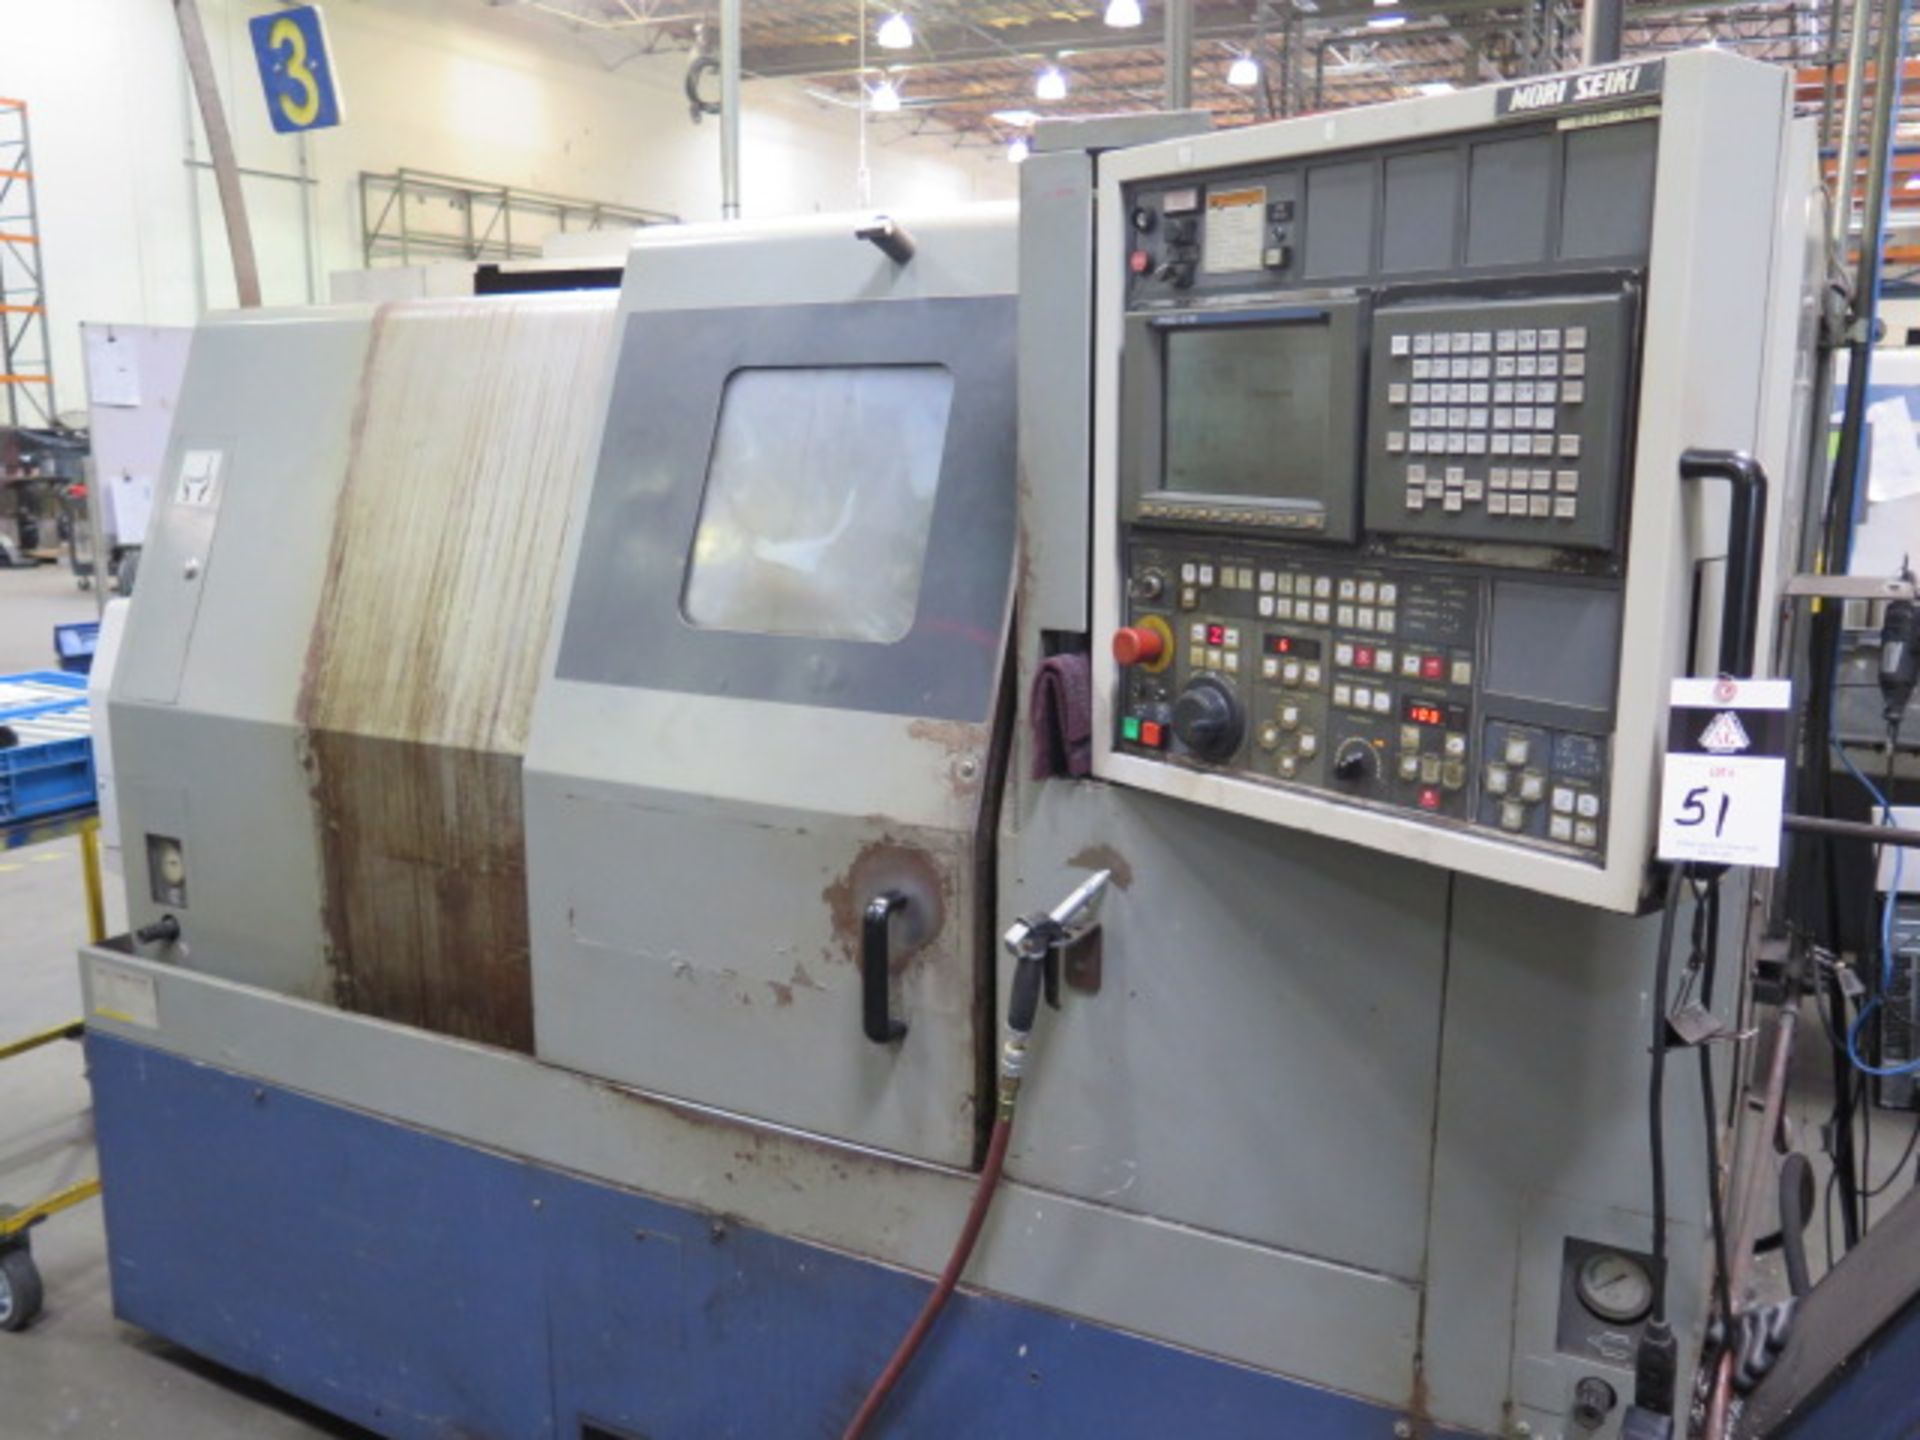 1997 Mori Seiki SL-250BMC Live Turret CNC Turning Center s/n 268 w/ MSC-518 Controls, SOLD AS IS - Image 3 of 12